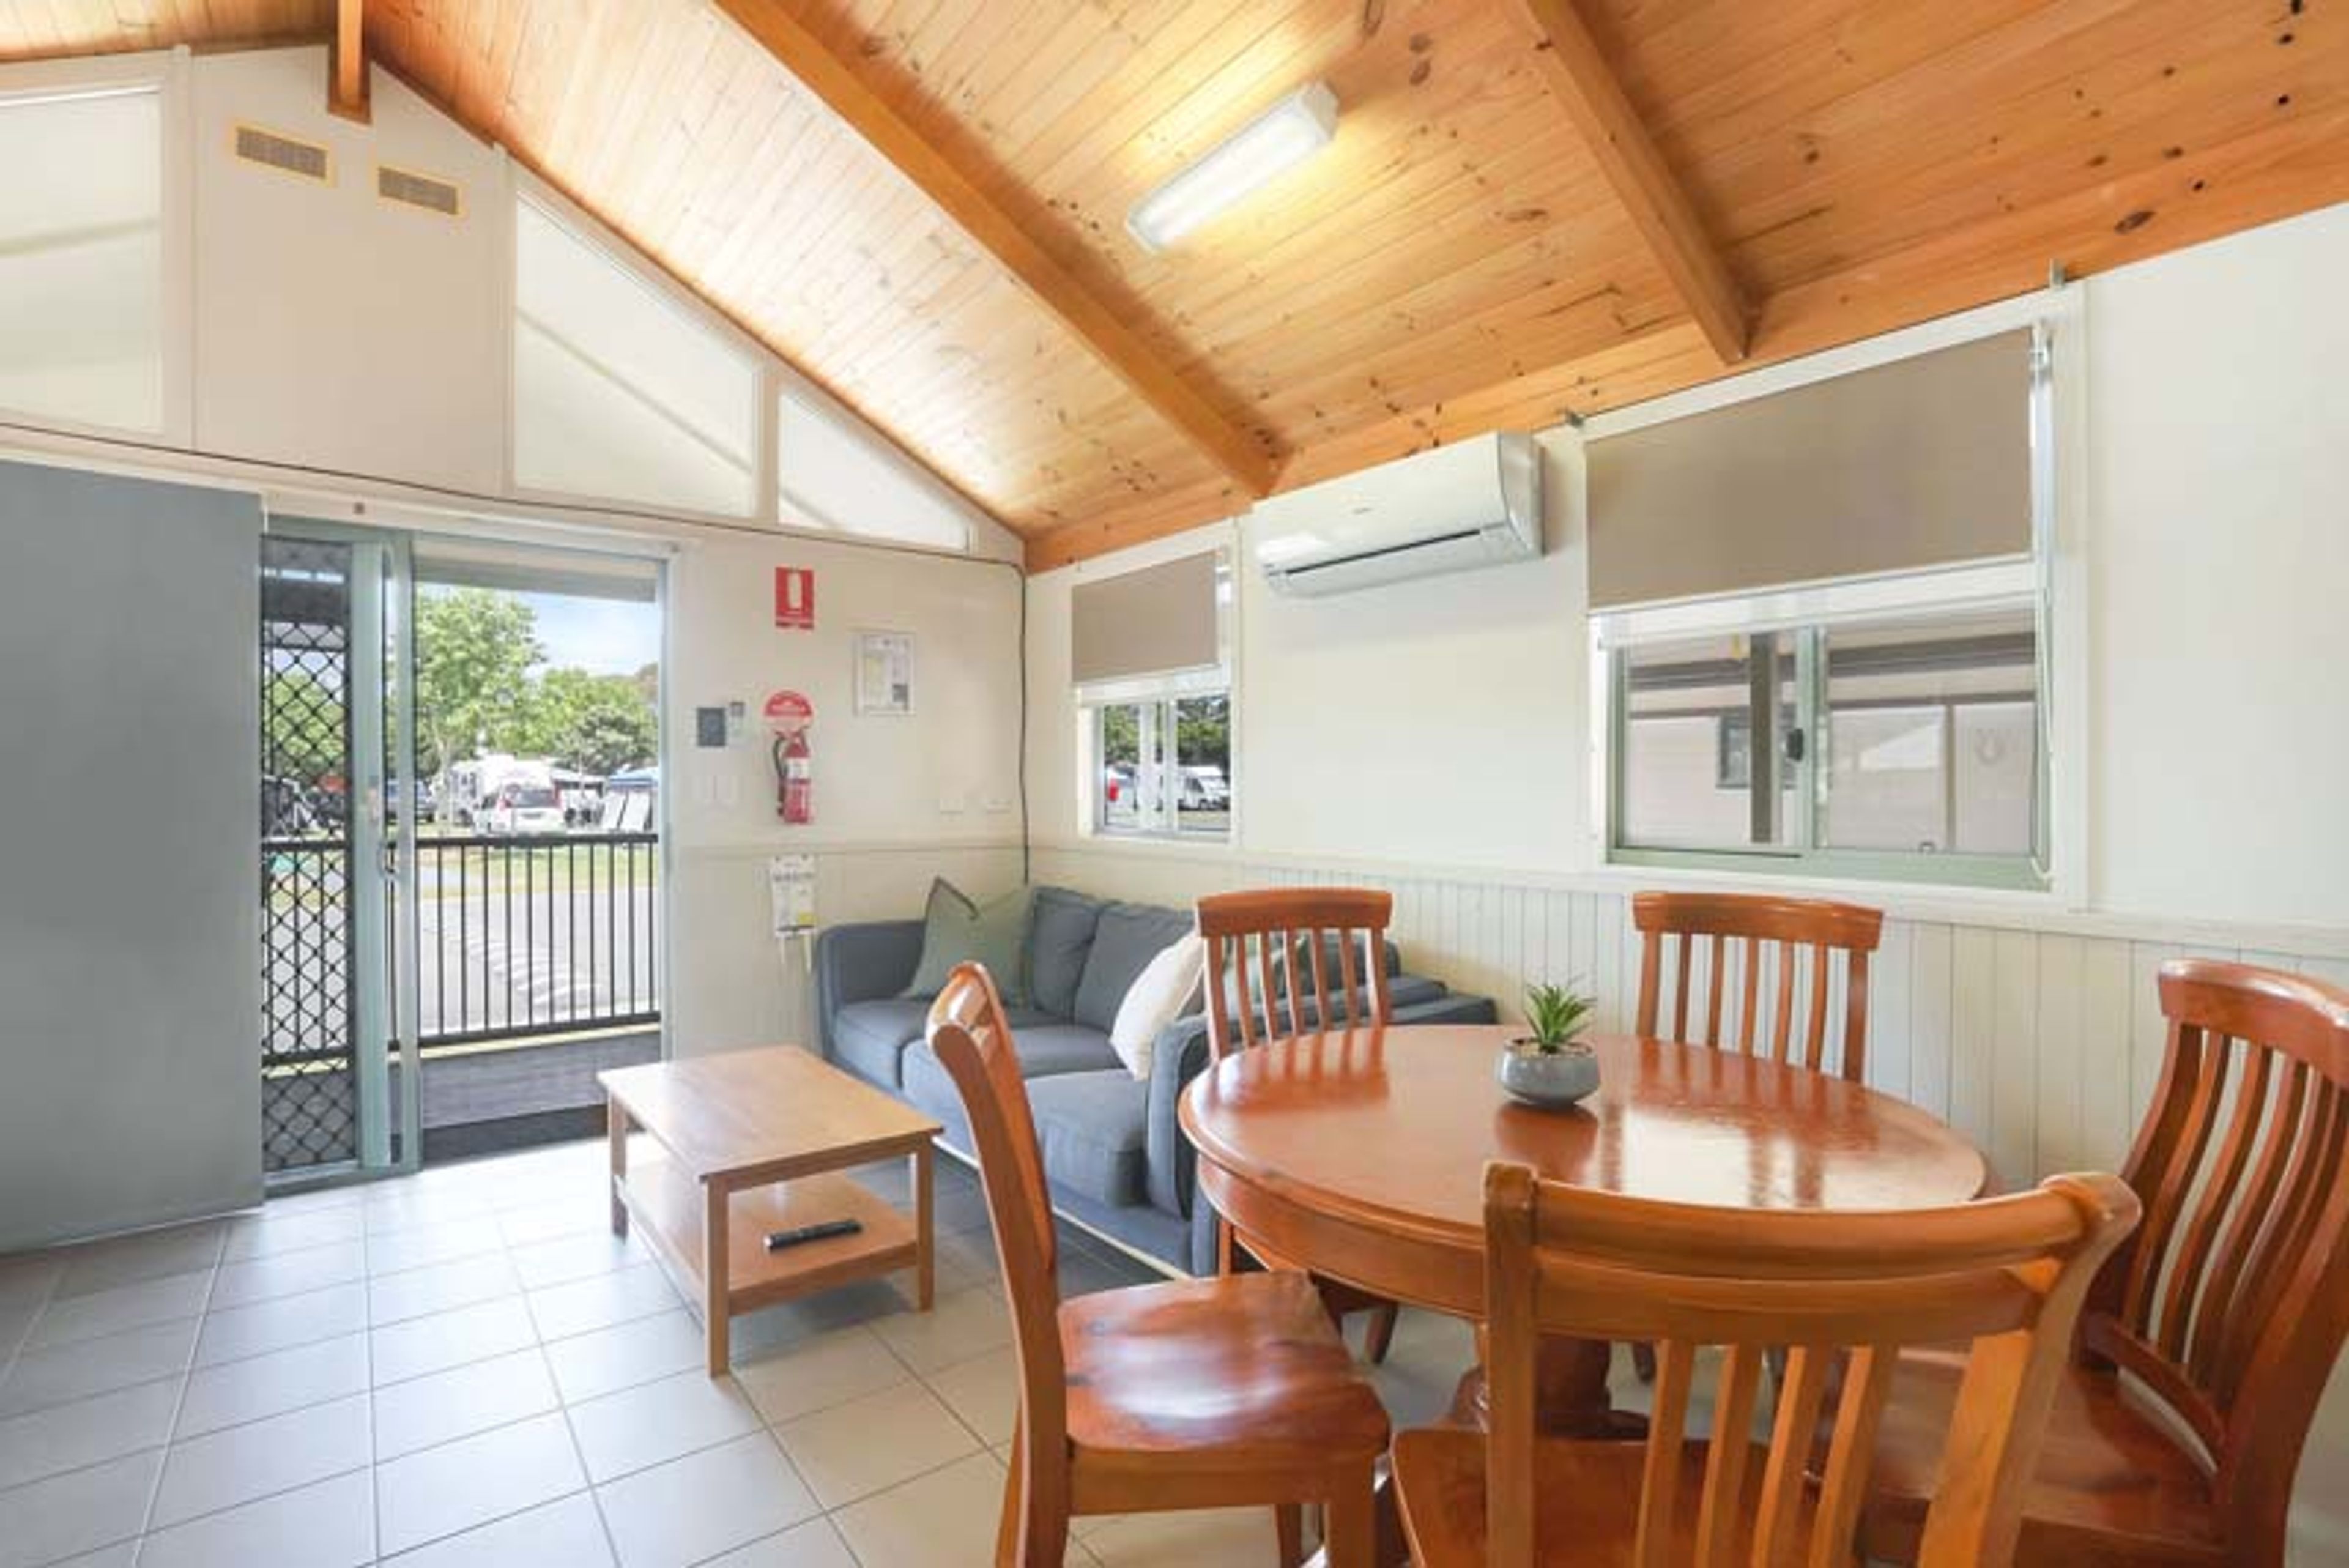 Tuncurry - Deluxe Cabin - Sleeps 4 - Dog Friendly 